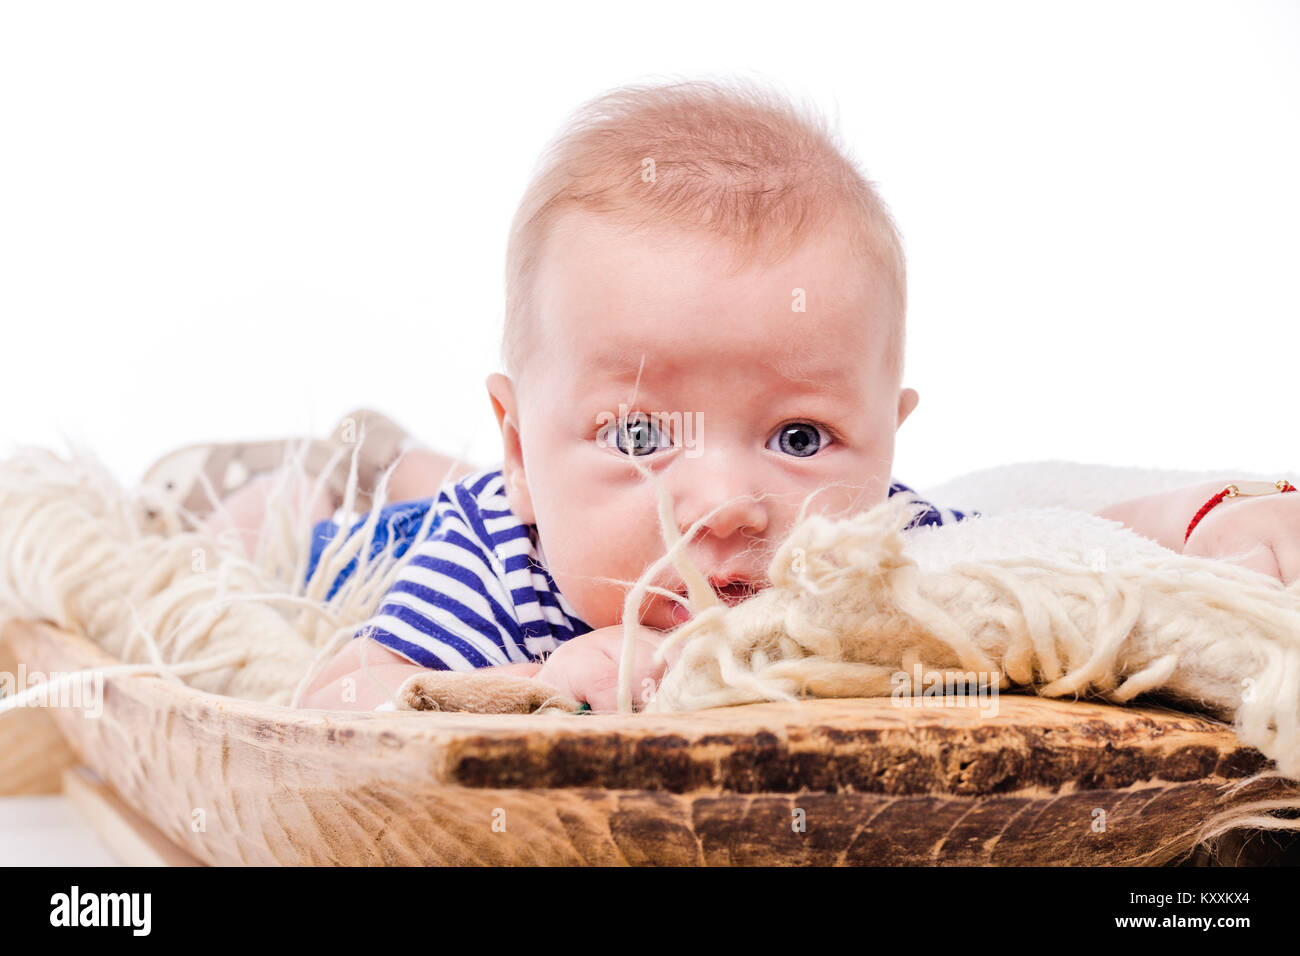 Adorable baby boy with big blue eyes over white background Stock Photo